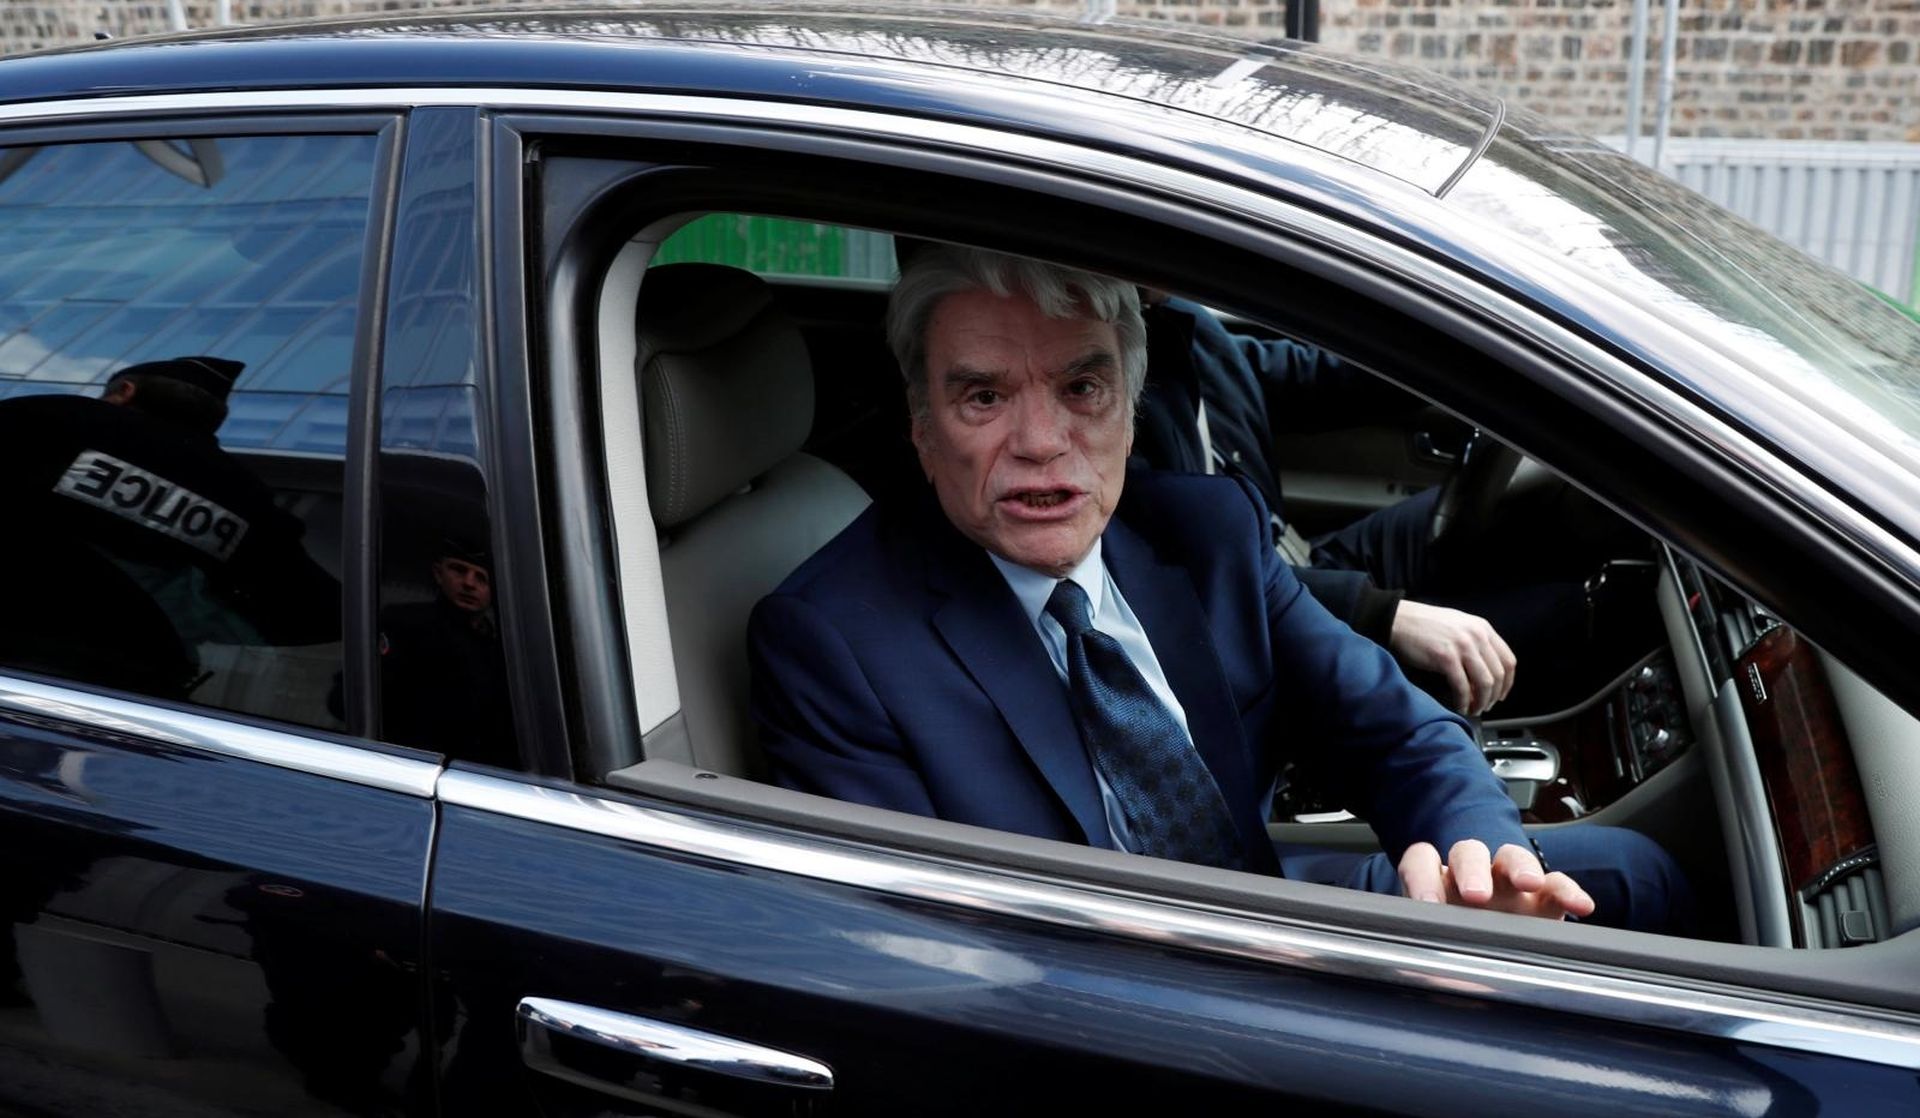 French businessman Bernard Tapie arrives in his car for a trial over a disputed state payment at the Paris courthouse French businessman Bernard Tapie arrives in his car for a trial over a disputed state payment at the Paris courthouse, France, March 11, 2019. REUTERS/Benoit Tessier BENOIT TESSIER